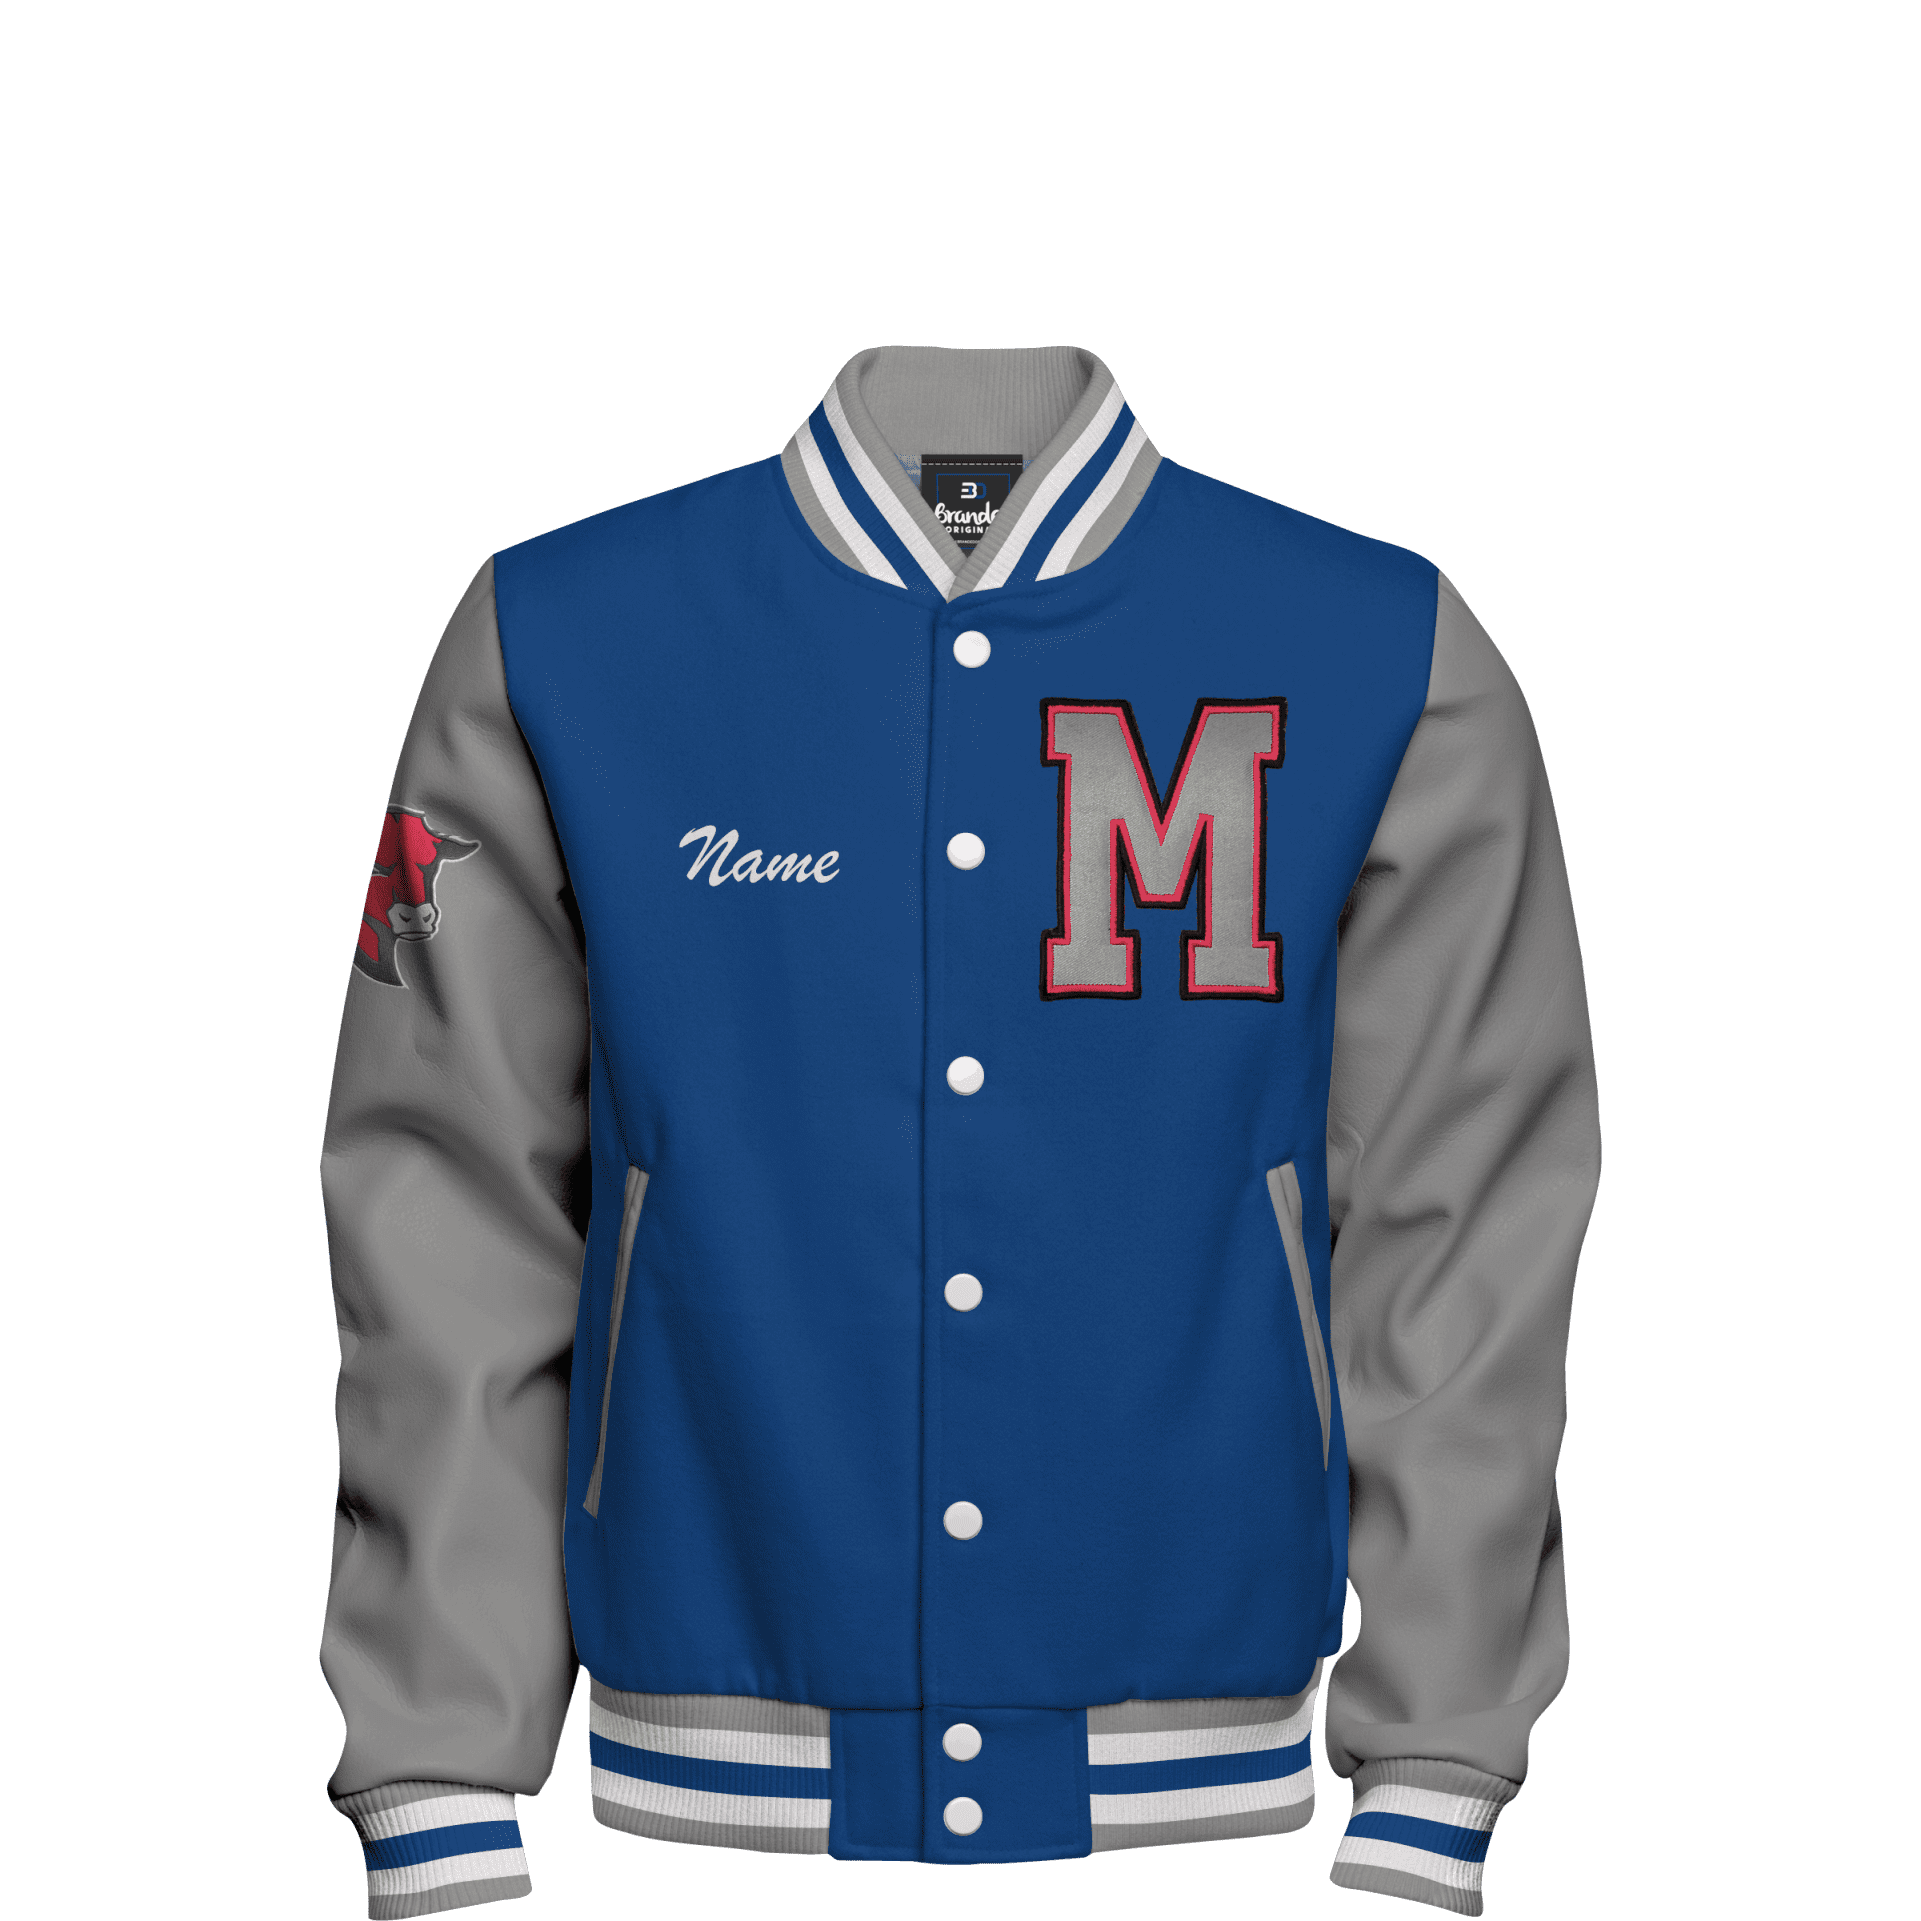 5 Uses Of Letterman Jacket Patches - Elegant Patches